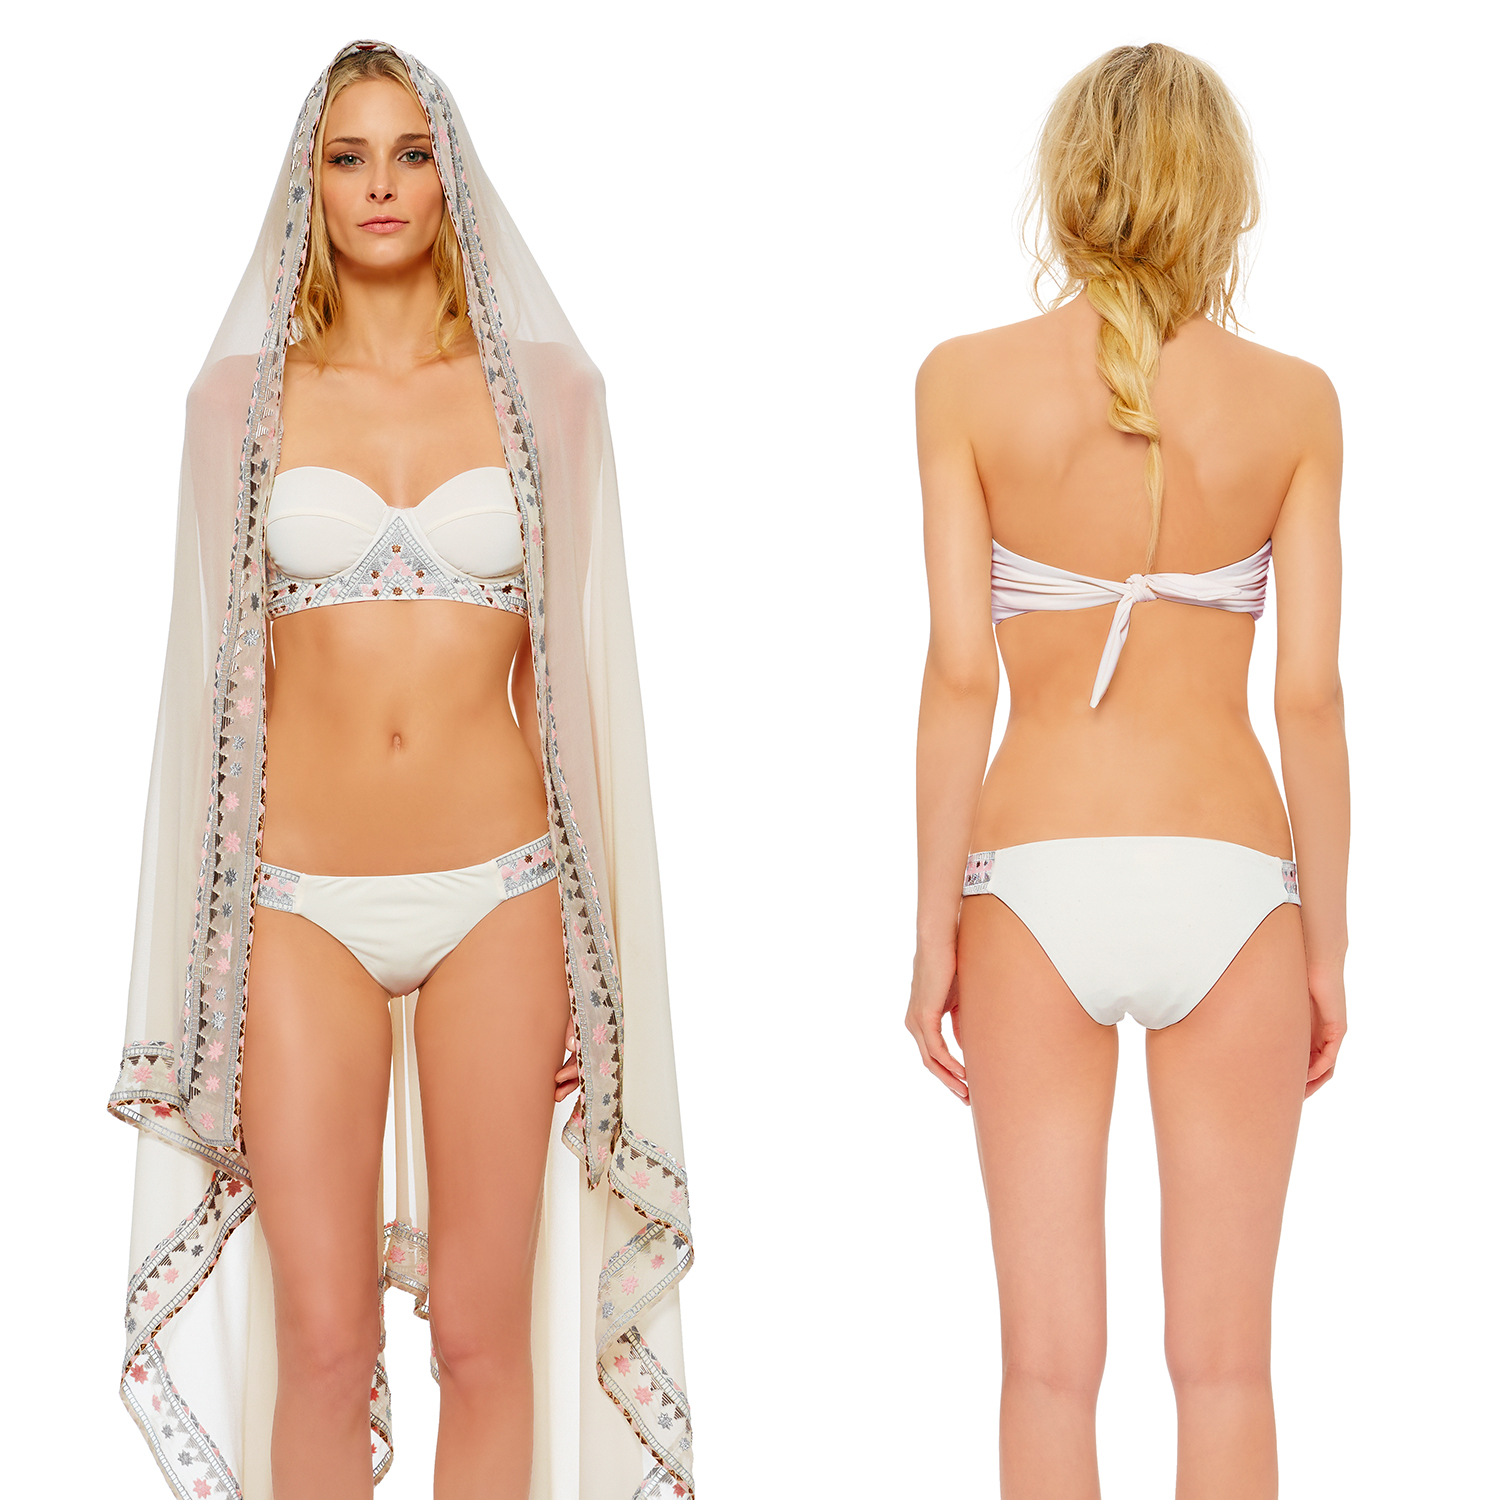 Something old, new, borrowed and skimpy? Behold the bridal swimsuit!